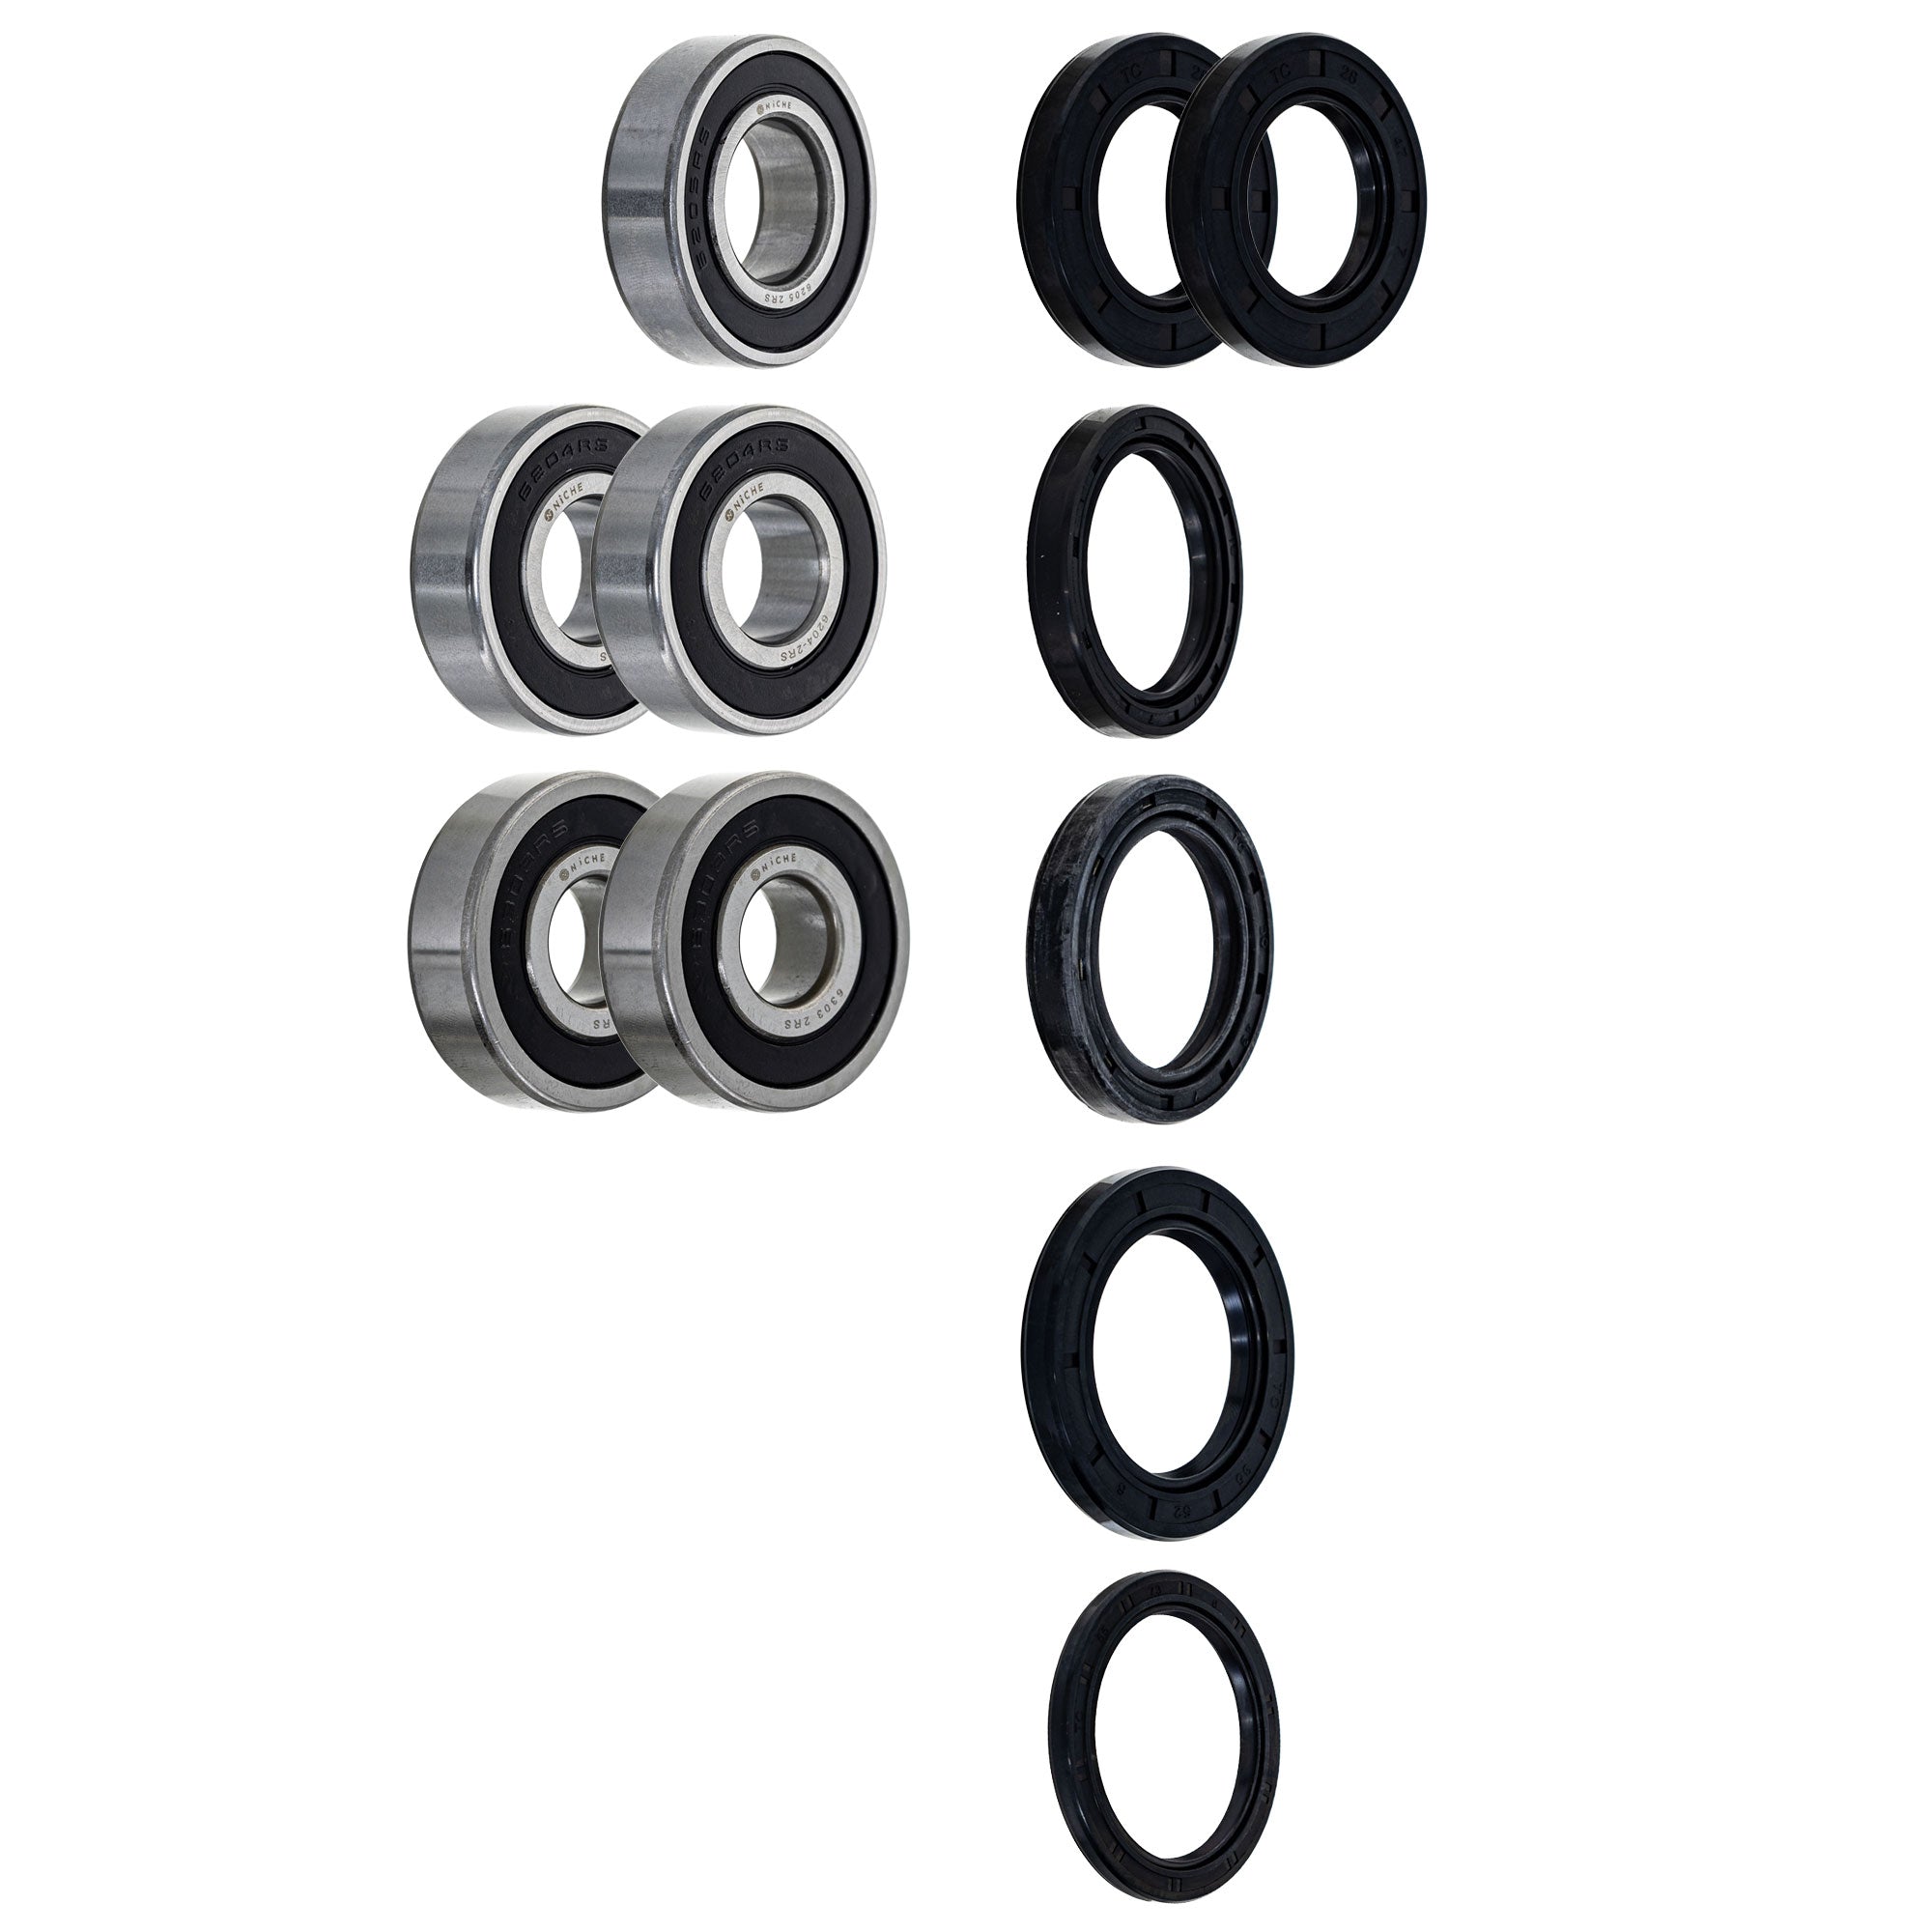 Wheel Bearing Seal Kit for zOTHER Ref No Tiger NICHE MK1008622